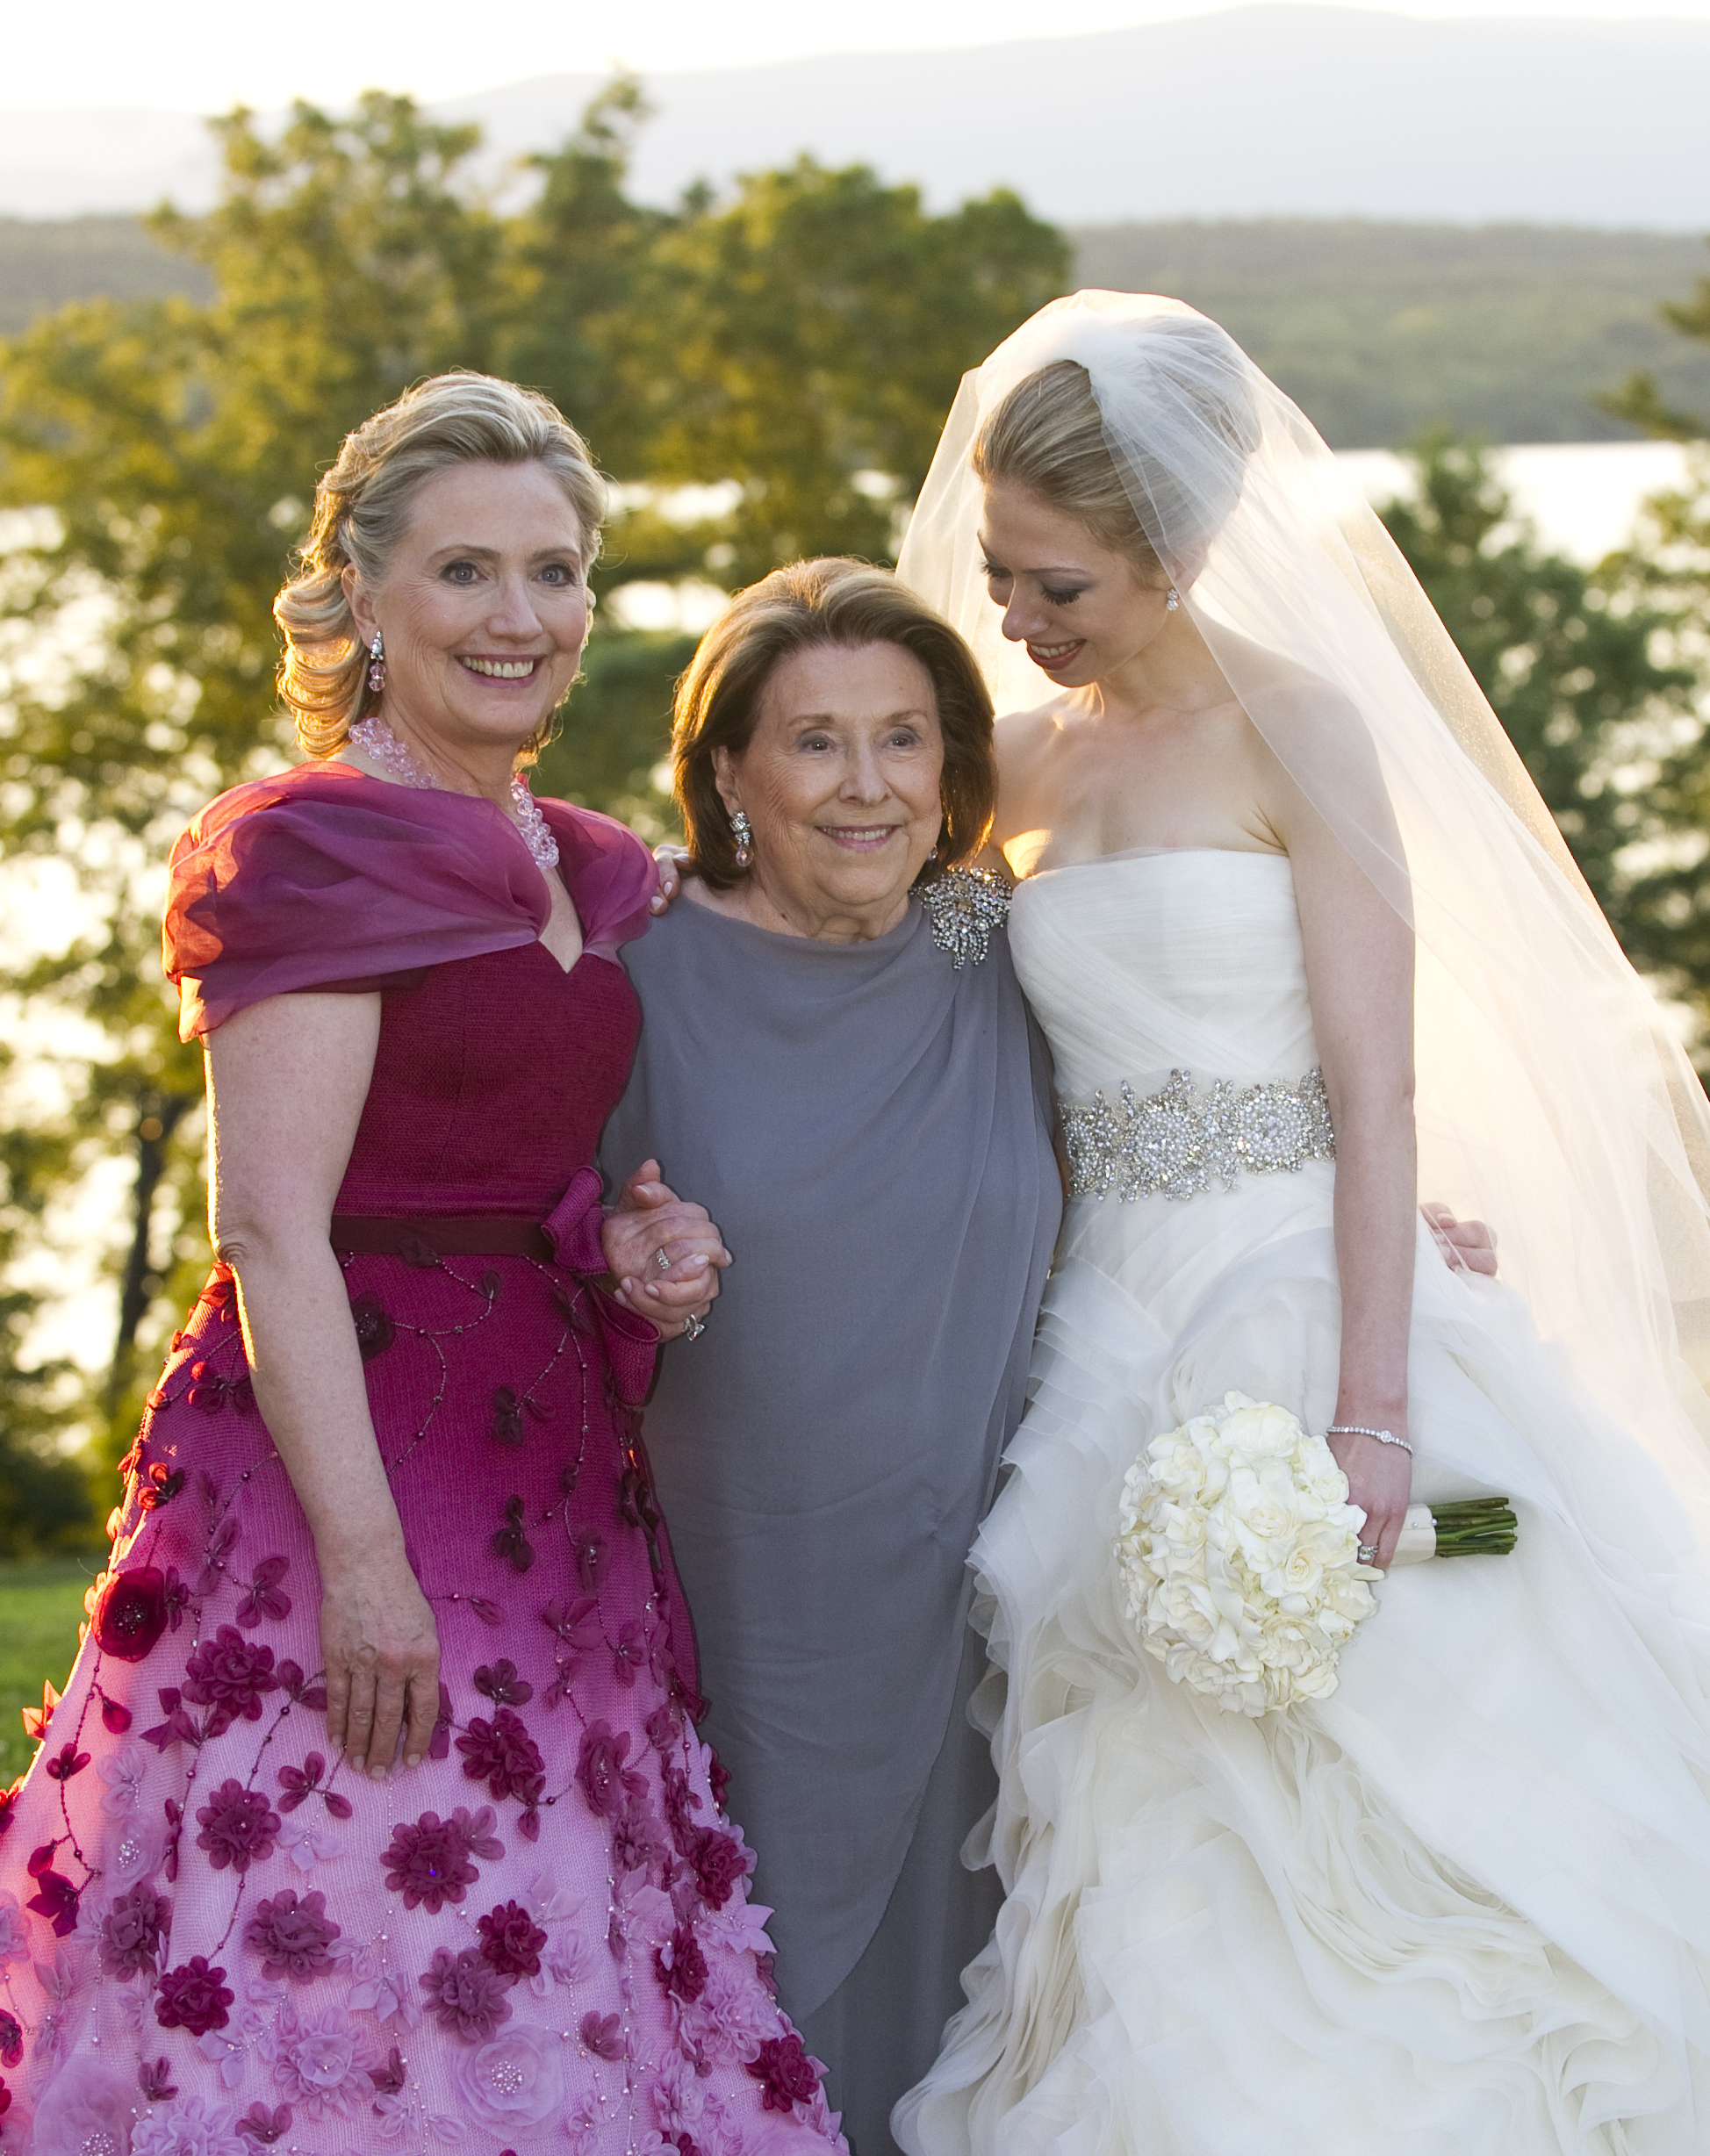 In this handout image provided by Barbara Kinney, (L-R) U.S. Secretary of State Hillary Clinton, her mother Dorothy Rodham and Chelsea Clinton pose during the wedding of Chelsea Clinton and Marc Mezvinsky at the Astor Courts Estate in Rhinebeck, N.Y., on July 31, 2010. (Handout—FilmMagic)